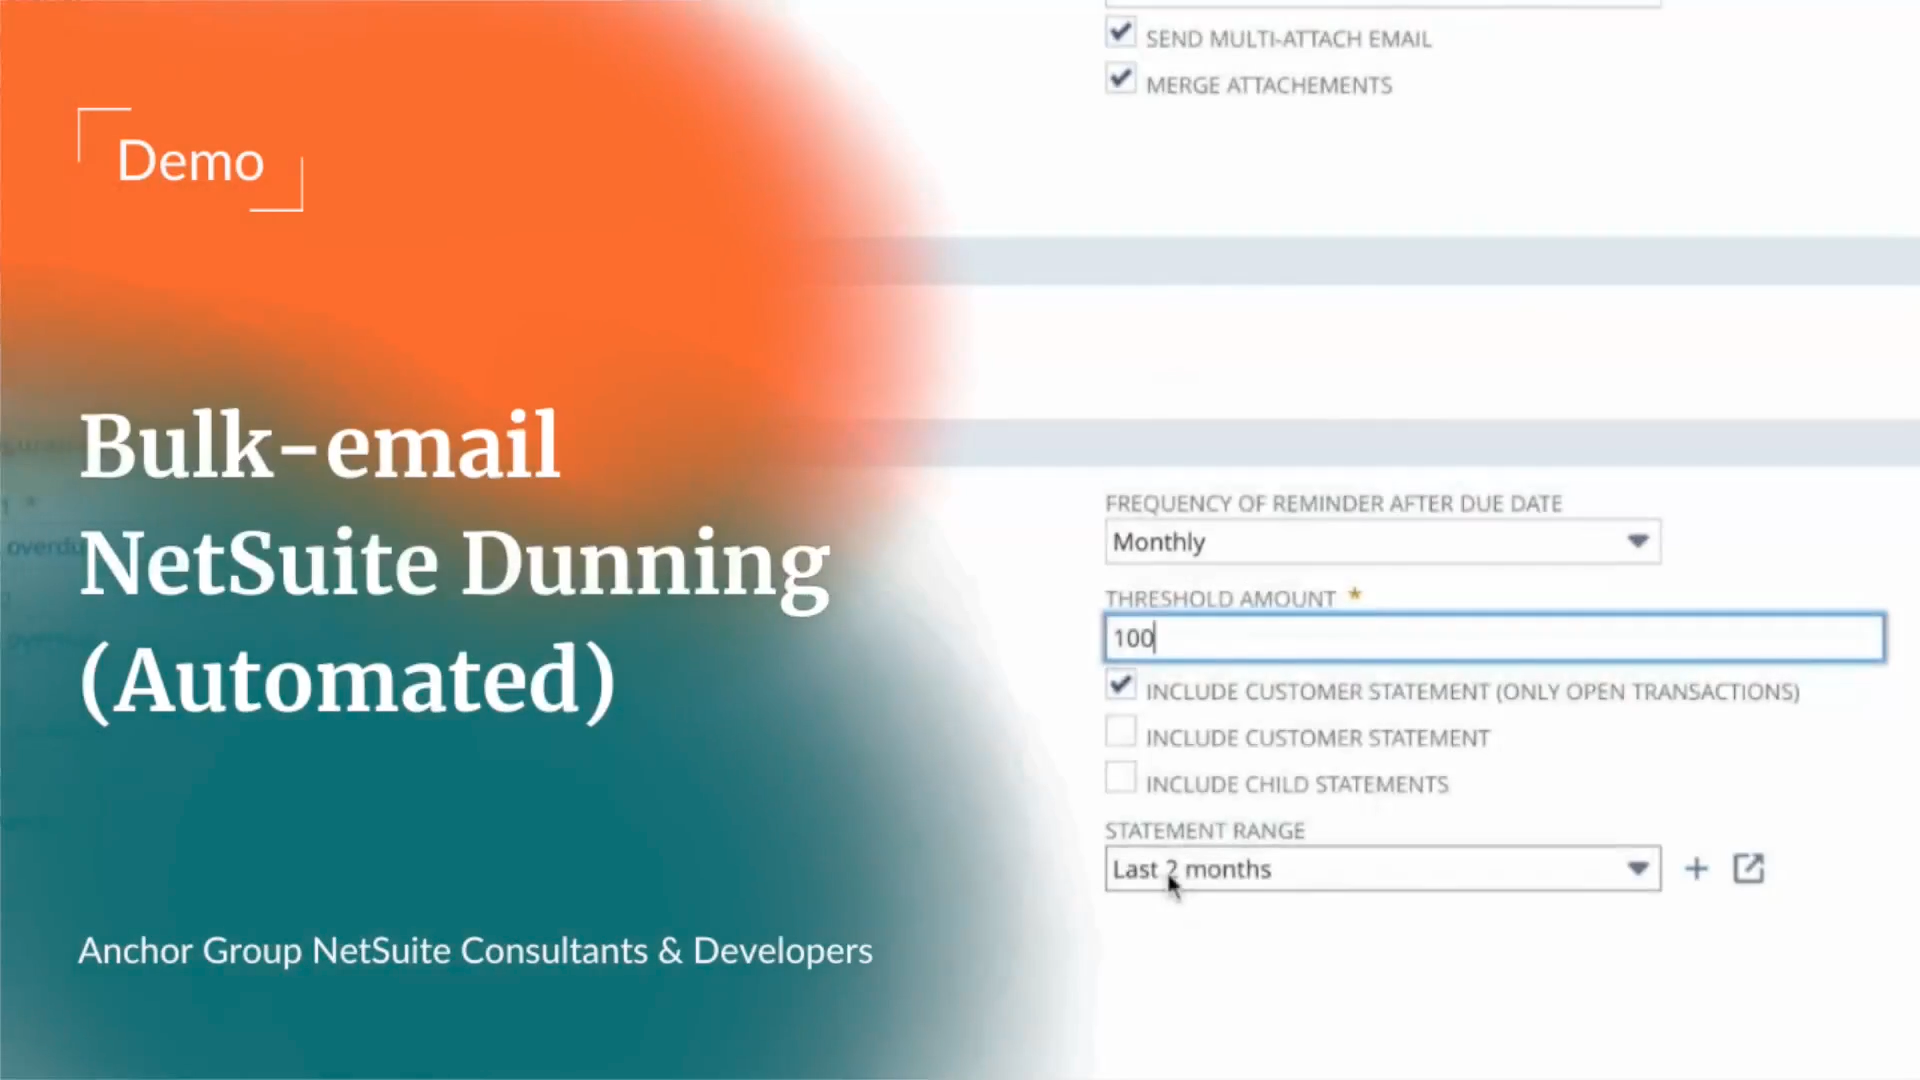 Working with Bulk-email NetSuite Dunning | Automated Version